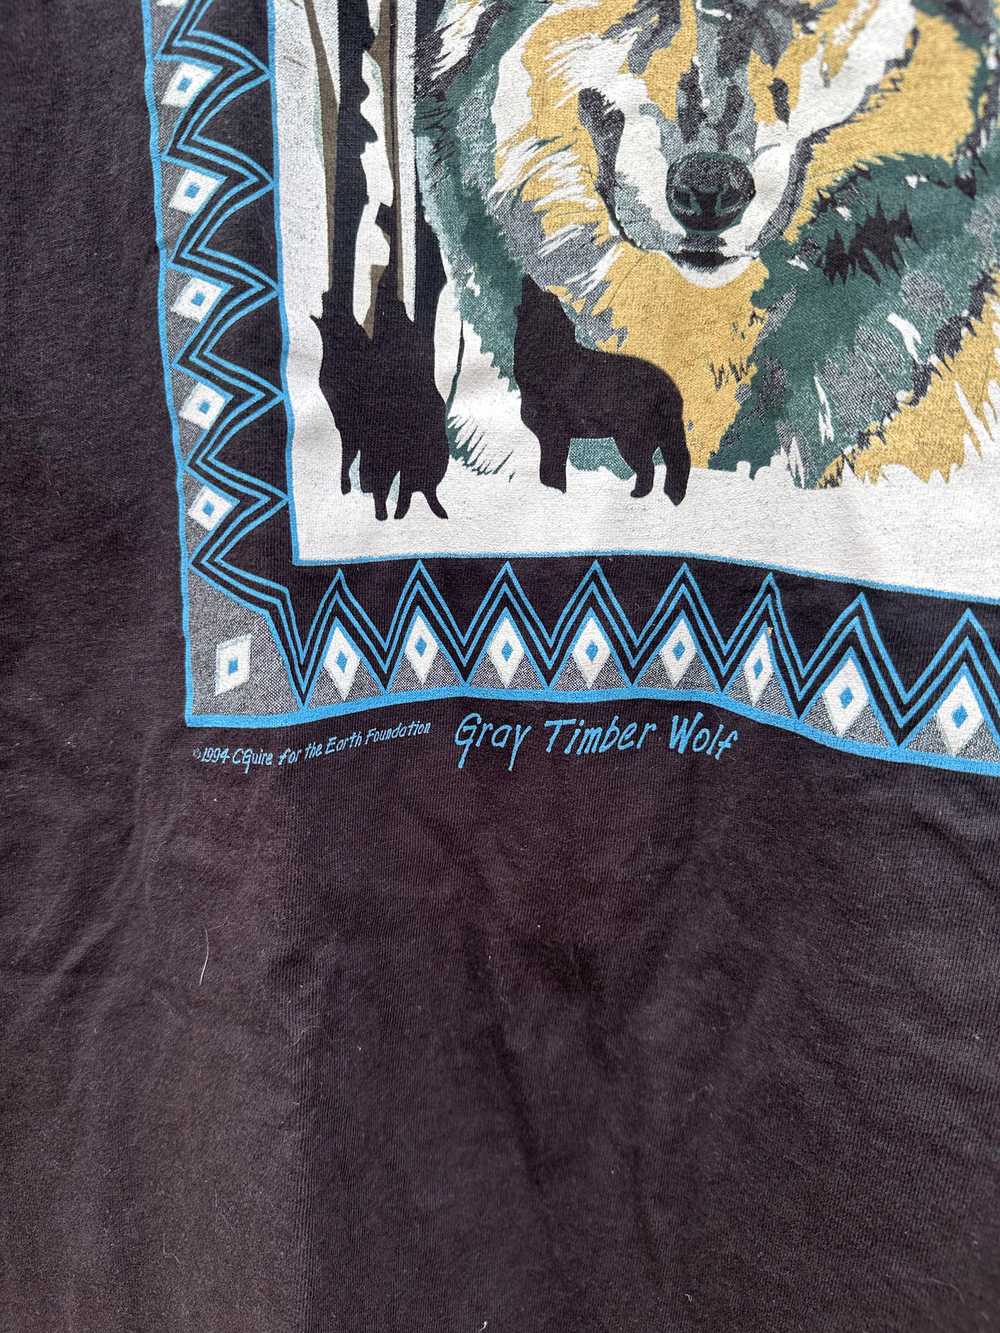 1994 There's Still Time - Save the Wolves T-shirt - image 2